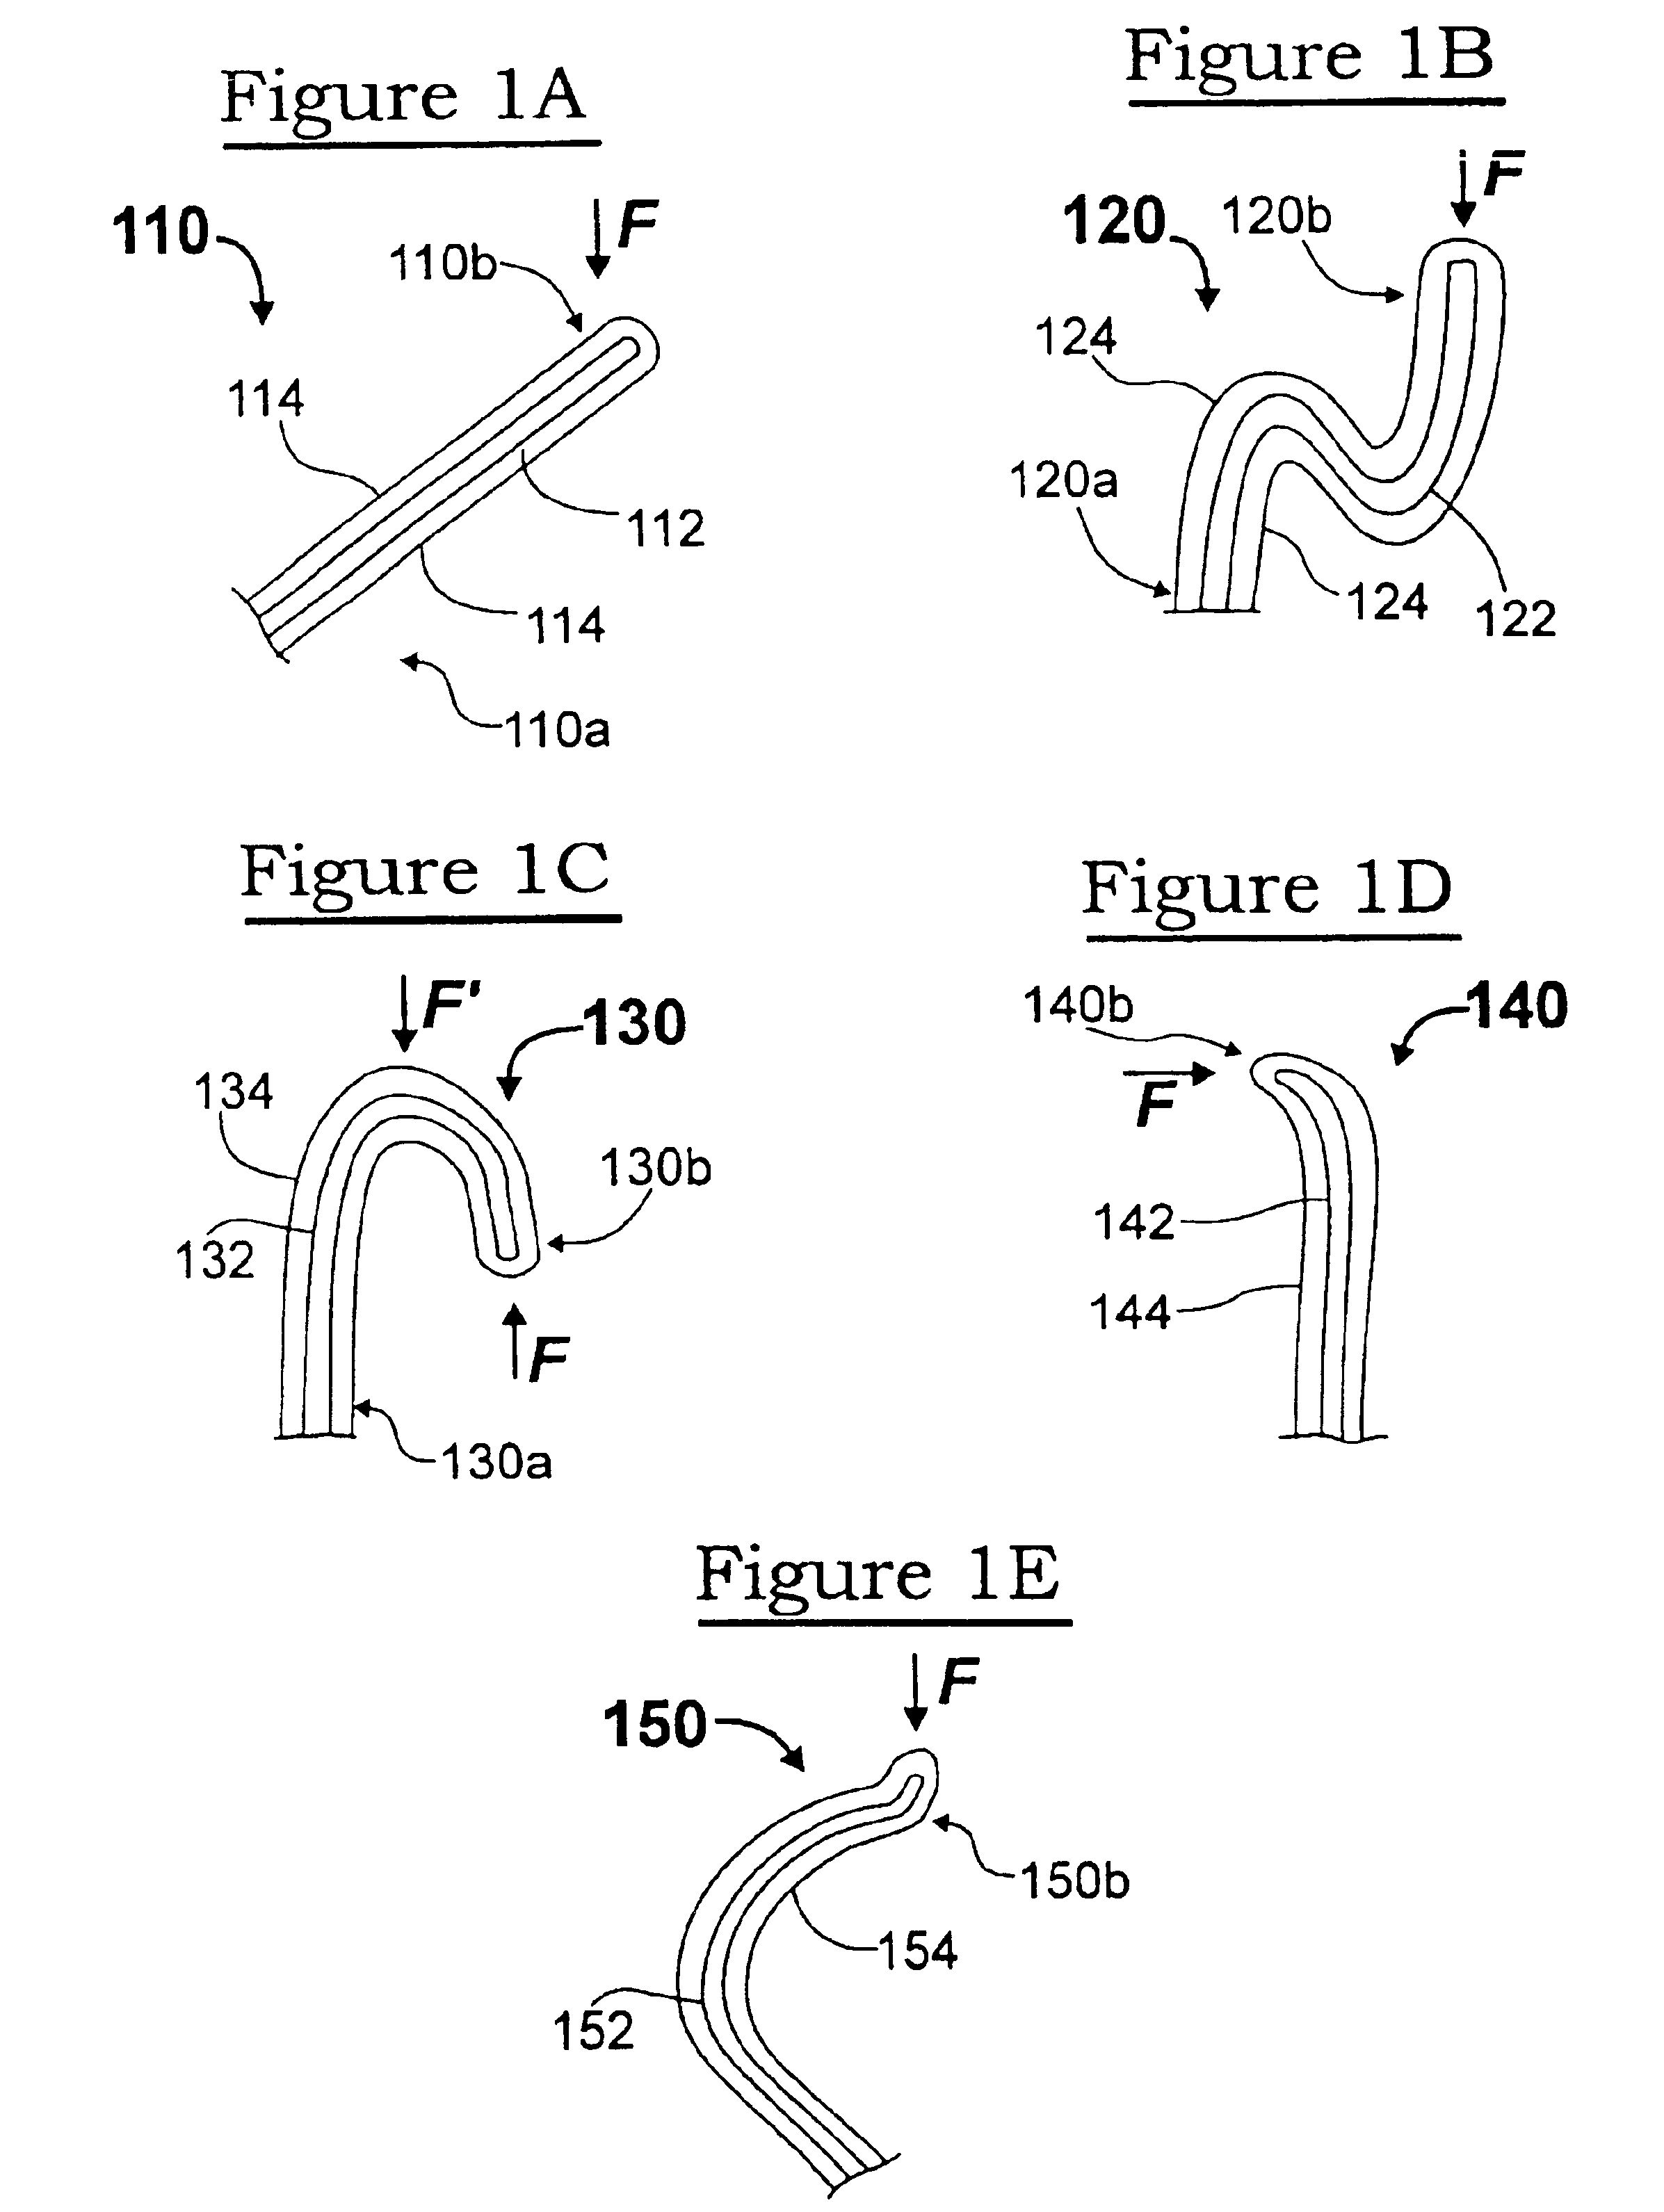 Methods of removably mounting electronic components to a circuit board, and sockets formed by the methods